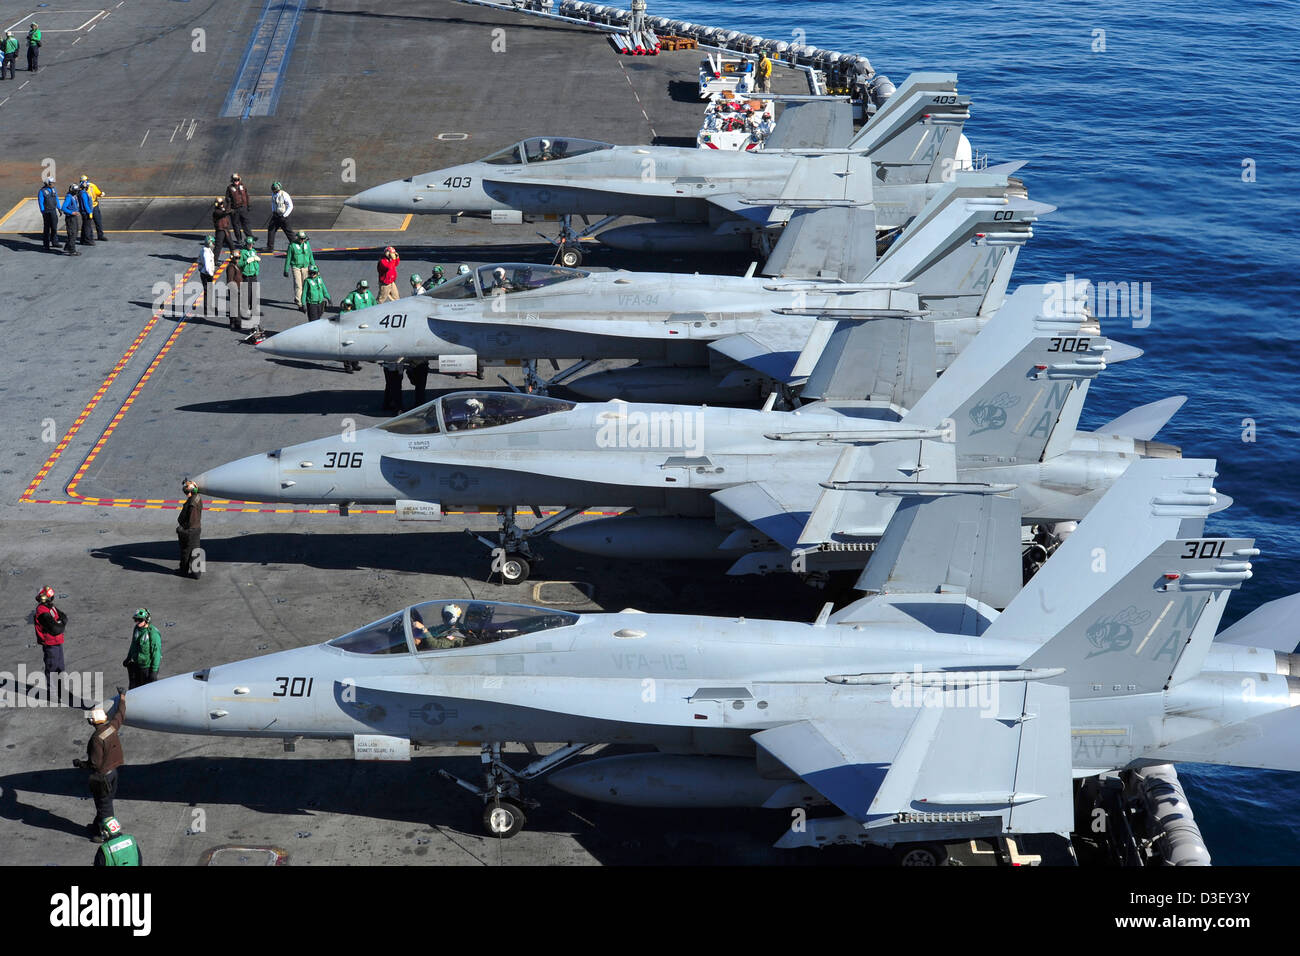 us-navy-fa-18c-hornets-line-up-before-take-off-from-the-us-navy-nimitz-D3EY3Y.jpg